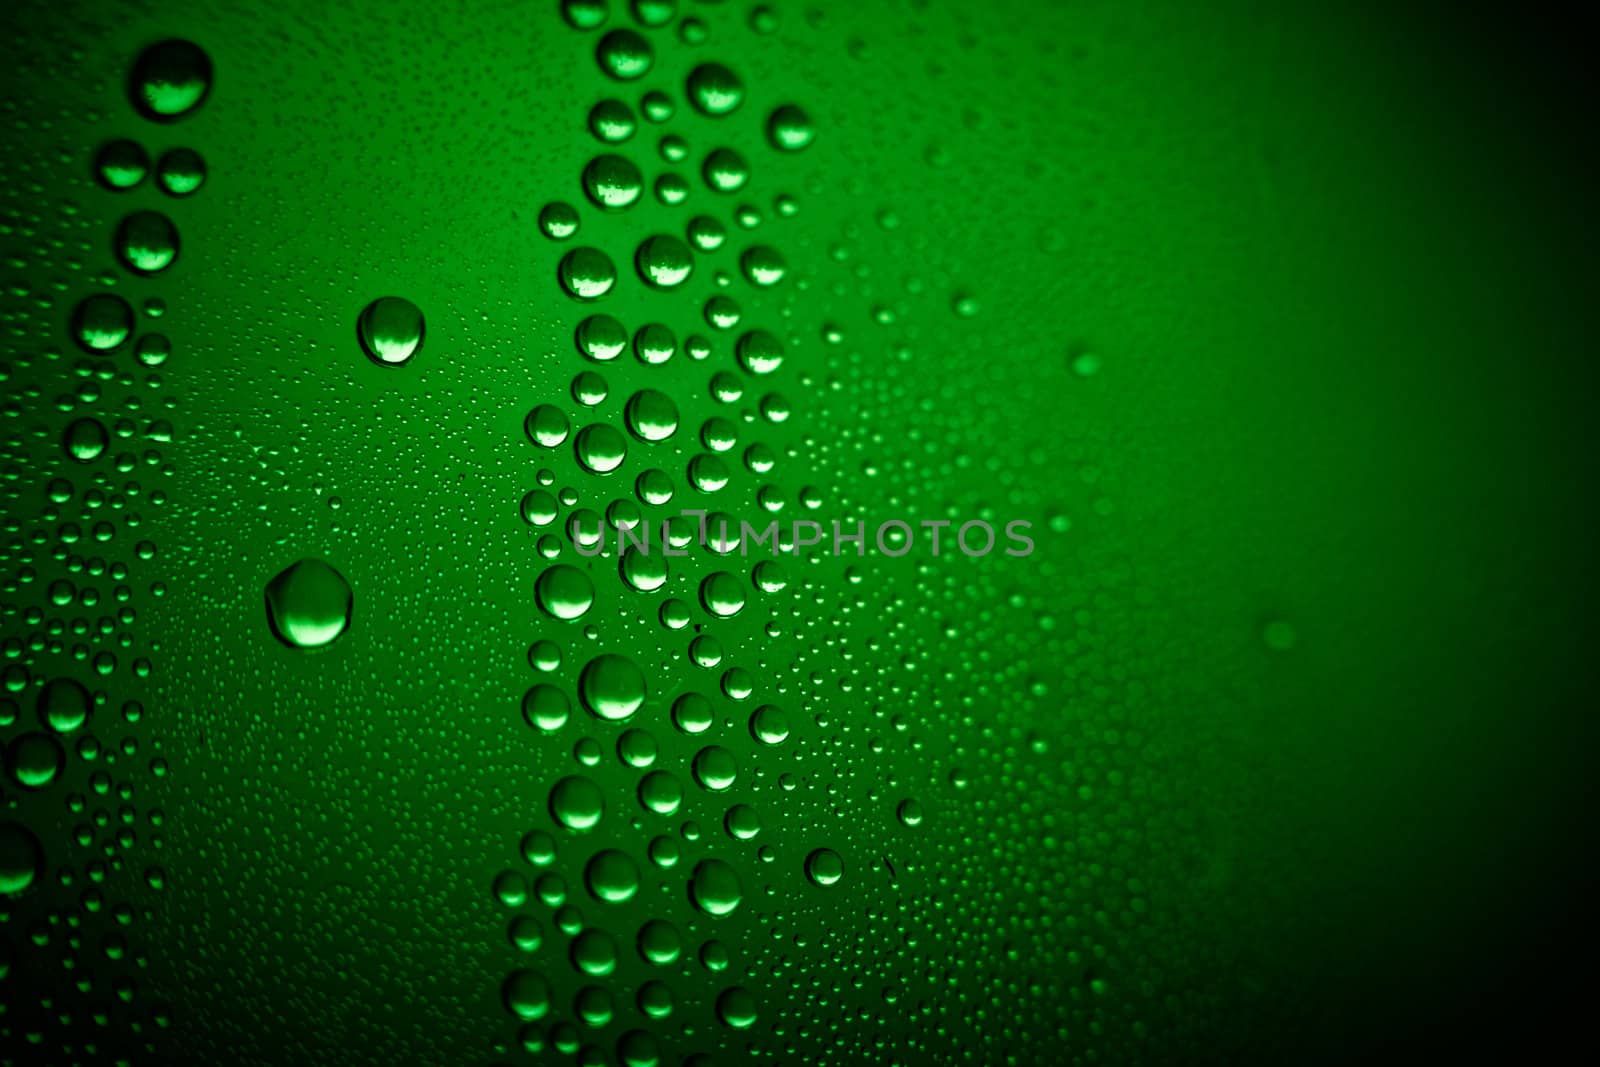 water-drops on green